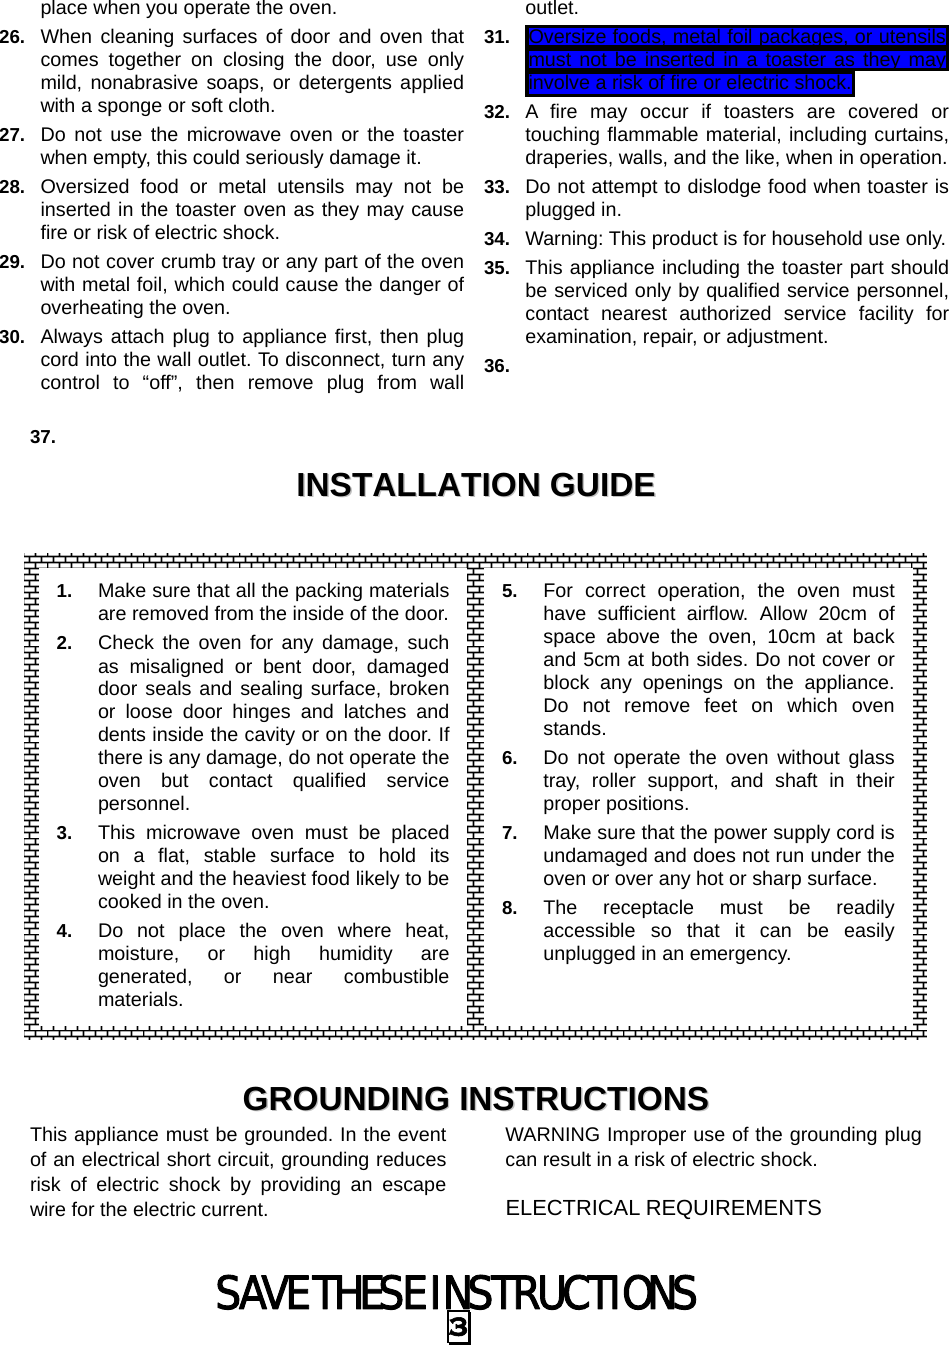 SAVE THESE INSTRUCTIONS 3 place when you operate the oven. 26.  When cleaning surfaces of door and oven that comes together on closing the door, use only mild, nonabrasive soaps, or detergents applied with a sponge or soft cloth. 27.  Do not use the microwave oven or the toaster when empty, this could seriously damage it. 28.  Oversized food or metal utensils may not be inserted in the toaster oven as they may cause fire or risk of electric shock. 29.  Do not cover crumb tray or any part of the oven with metal foil, which could cause the danger of overheating the oven. 30.  Always attach plug to appliance first, then plug cord into the wall outlet. To disconnect, turn any control to “off”, then remove plug from wall outlet. 31.  Oversize foods, metal foil packages, or utensils must not be inserted in a toaster as they may  involve a risk of fire or electric shock.  32.  A fire may occur if toasters are covered or touching flammable material, including curtains, draperies, walls, and the like, when in operation. 33.  Do not attempt to dislodge food when toaster is plugged in. 34.  Warning: This product is for household use only. 35.  This appliance including the toaster part should be serviced only by qualified service personnel, contact nearest authorized service facility for examination, repair, or adjustment. 36.    37.   IINNSSTTAALLLLAATTIIOONN  GGUUIIDDEE                    GGRROOUUNNDDIINNGG  IINNSSTTRRUUCCTTIIOONNSS  This appliance must be grounded. In the event of an electrical short circuit, grounding reduces risk of electric shock by providing an escape wire for the electric current.   WARNING Improper use of the grounding plug can result in a risk of electric shock. ELECTRICAL REQUIREMENTS 1.  Make sure that all the packing materials are removed from the inside of the door.2.  Check the oven for any damage, such as misaligned or bent door, damaged door seals and sealing surface, broken or loose door hinges and latches and dents inside the cavity or on the door. If there is any damage, do not operate the oven but contact qualified service personnel. 3.  This microwave oven must be placed on a flat, stable surface to hold its weight and the heaviest food likely to be cooked in the oven.   4.  Do not place the oven where heat, moisture, or high humidity are generated, or near combustible materials. 5.  For correct operation, the oven must have sufficient airflow. Allow 20cm of space above the oven, 10cm at back and 5cm at both sides. Do not cover or block any openings on the appliance. Do not remove feet on which oven stands. 6.  Do not operate the oven without glass tray, roller support, and shaft in their proper positions.   7.  Make sure that the power supply cord is undamaged and does not run under the oven or over any hot or sharp surface. 8.  The receptacle must be readily accessible so that it can be easily unplugged in an emergency. 